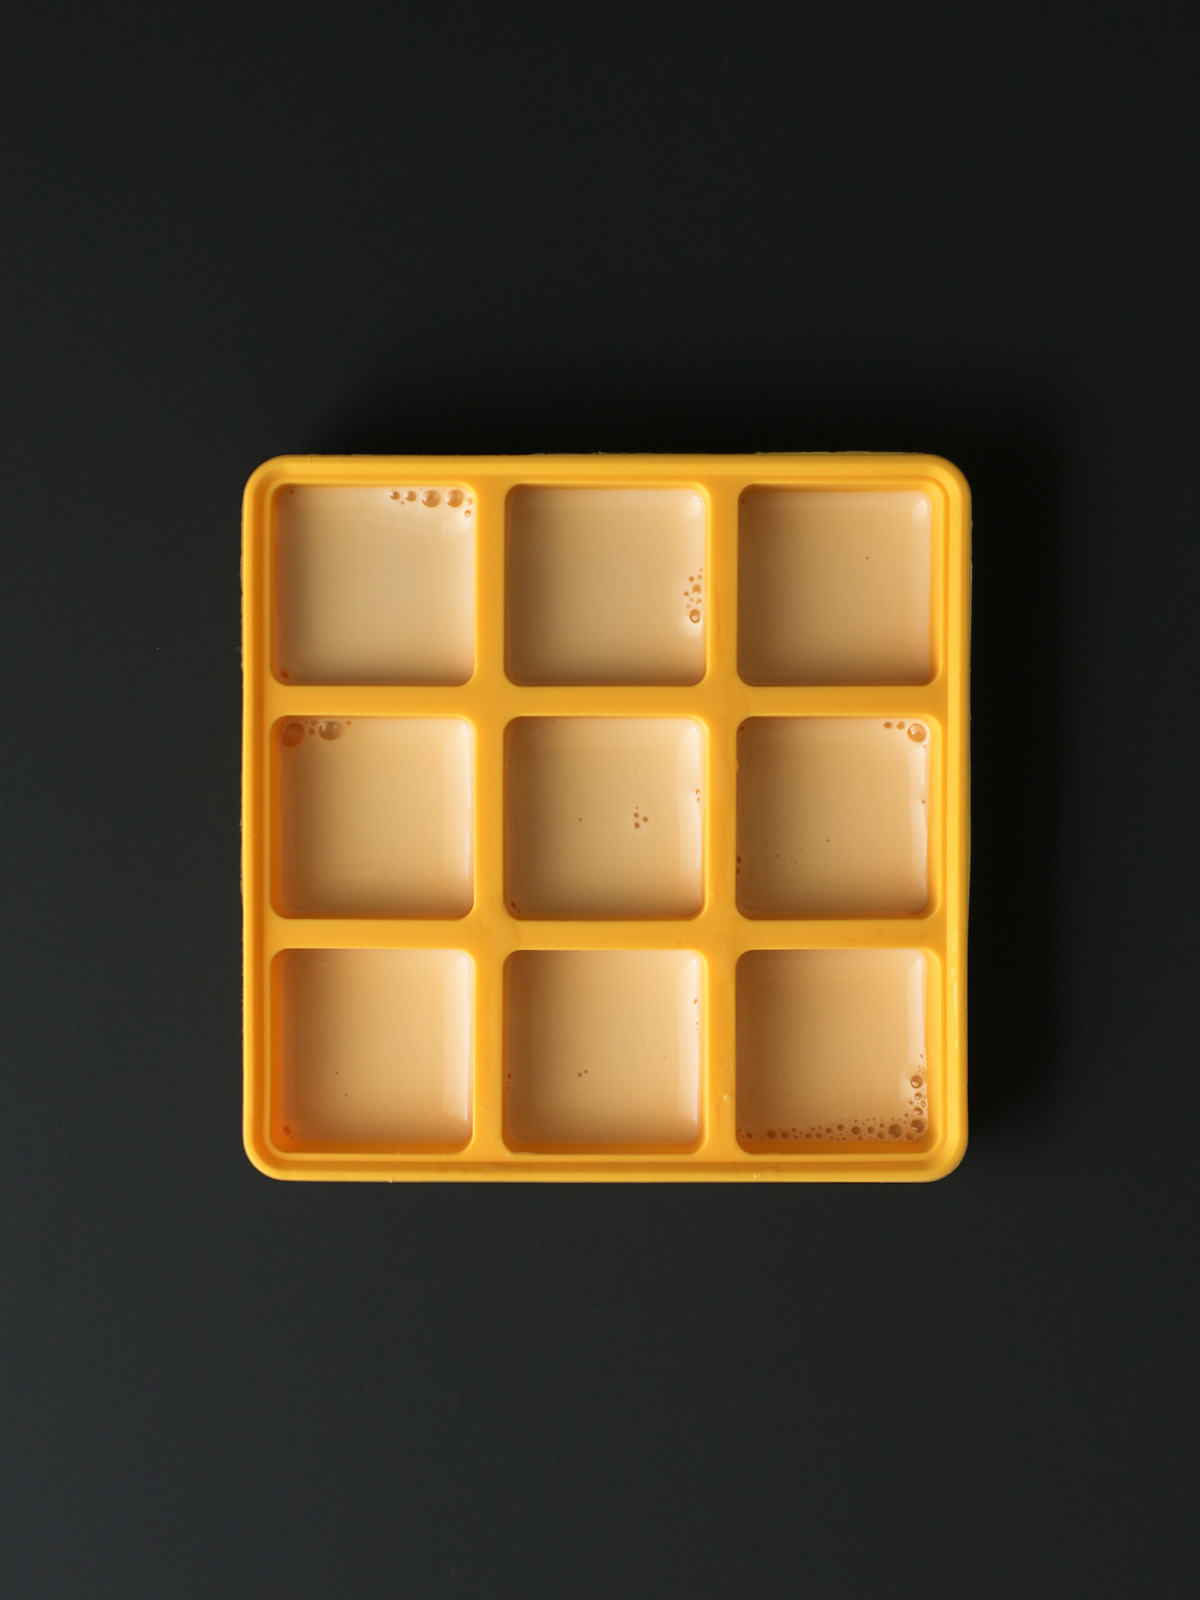 evaporated milk poured into ice cube trays.